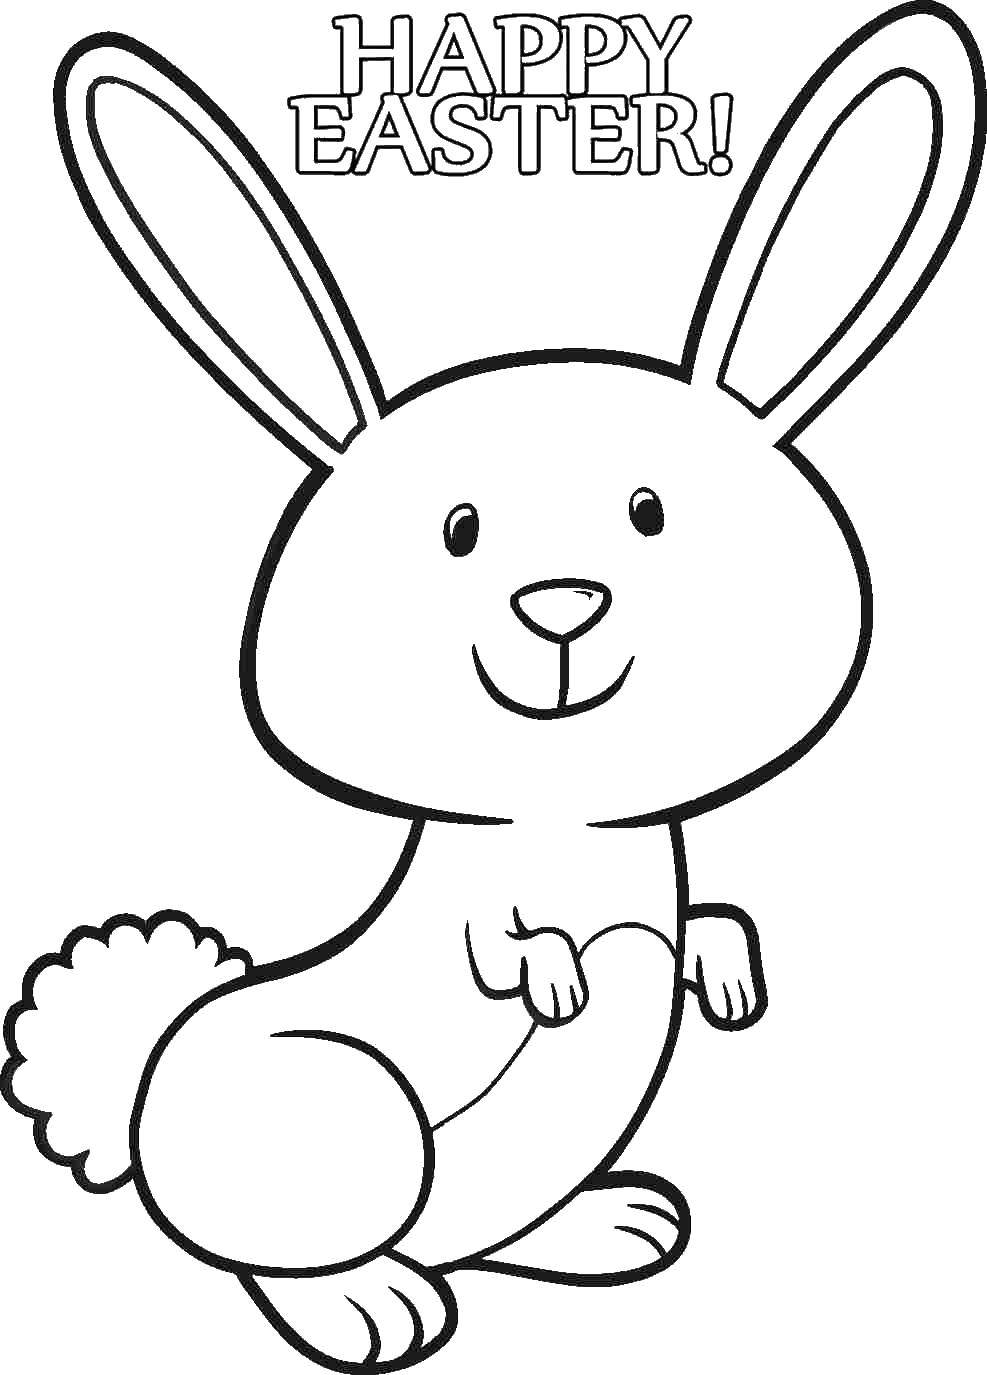 Coloring Greetings for Easter. Category coloring Easter. Tags:  Bunny, rabbit, Easter.